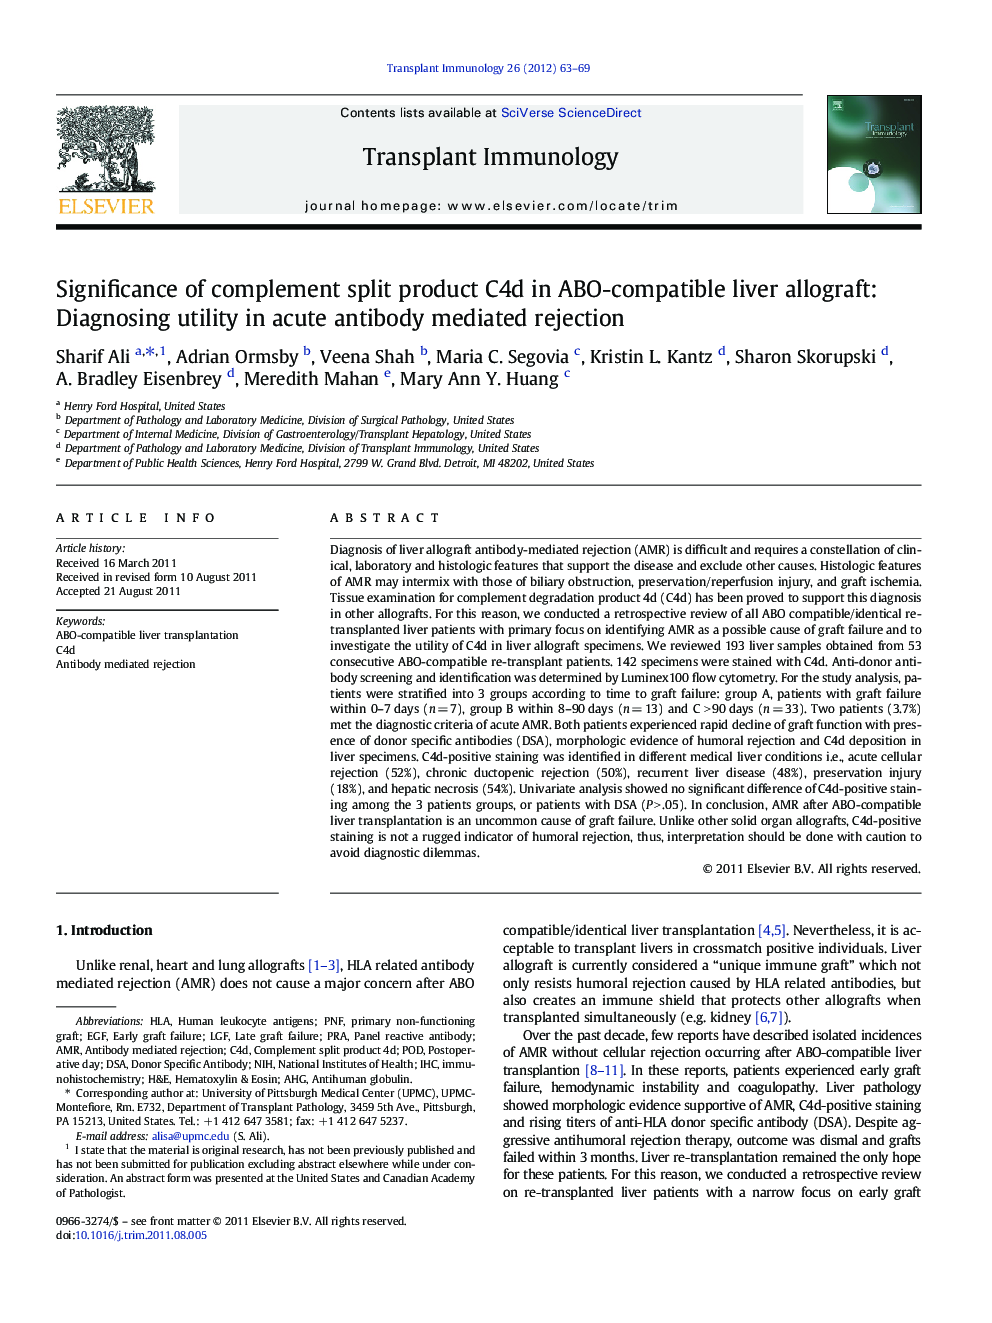 Significance of complement split product C4d in ABO-compatible liver allograft: Diagnosing utility in acute antibody mediated rejection